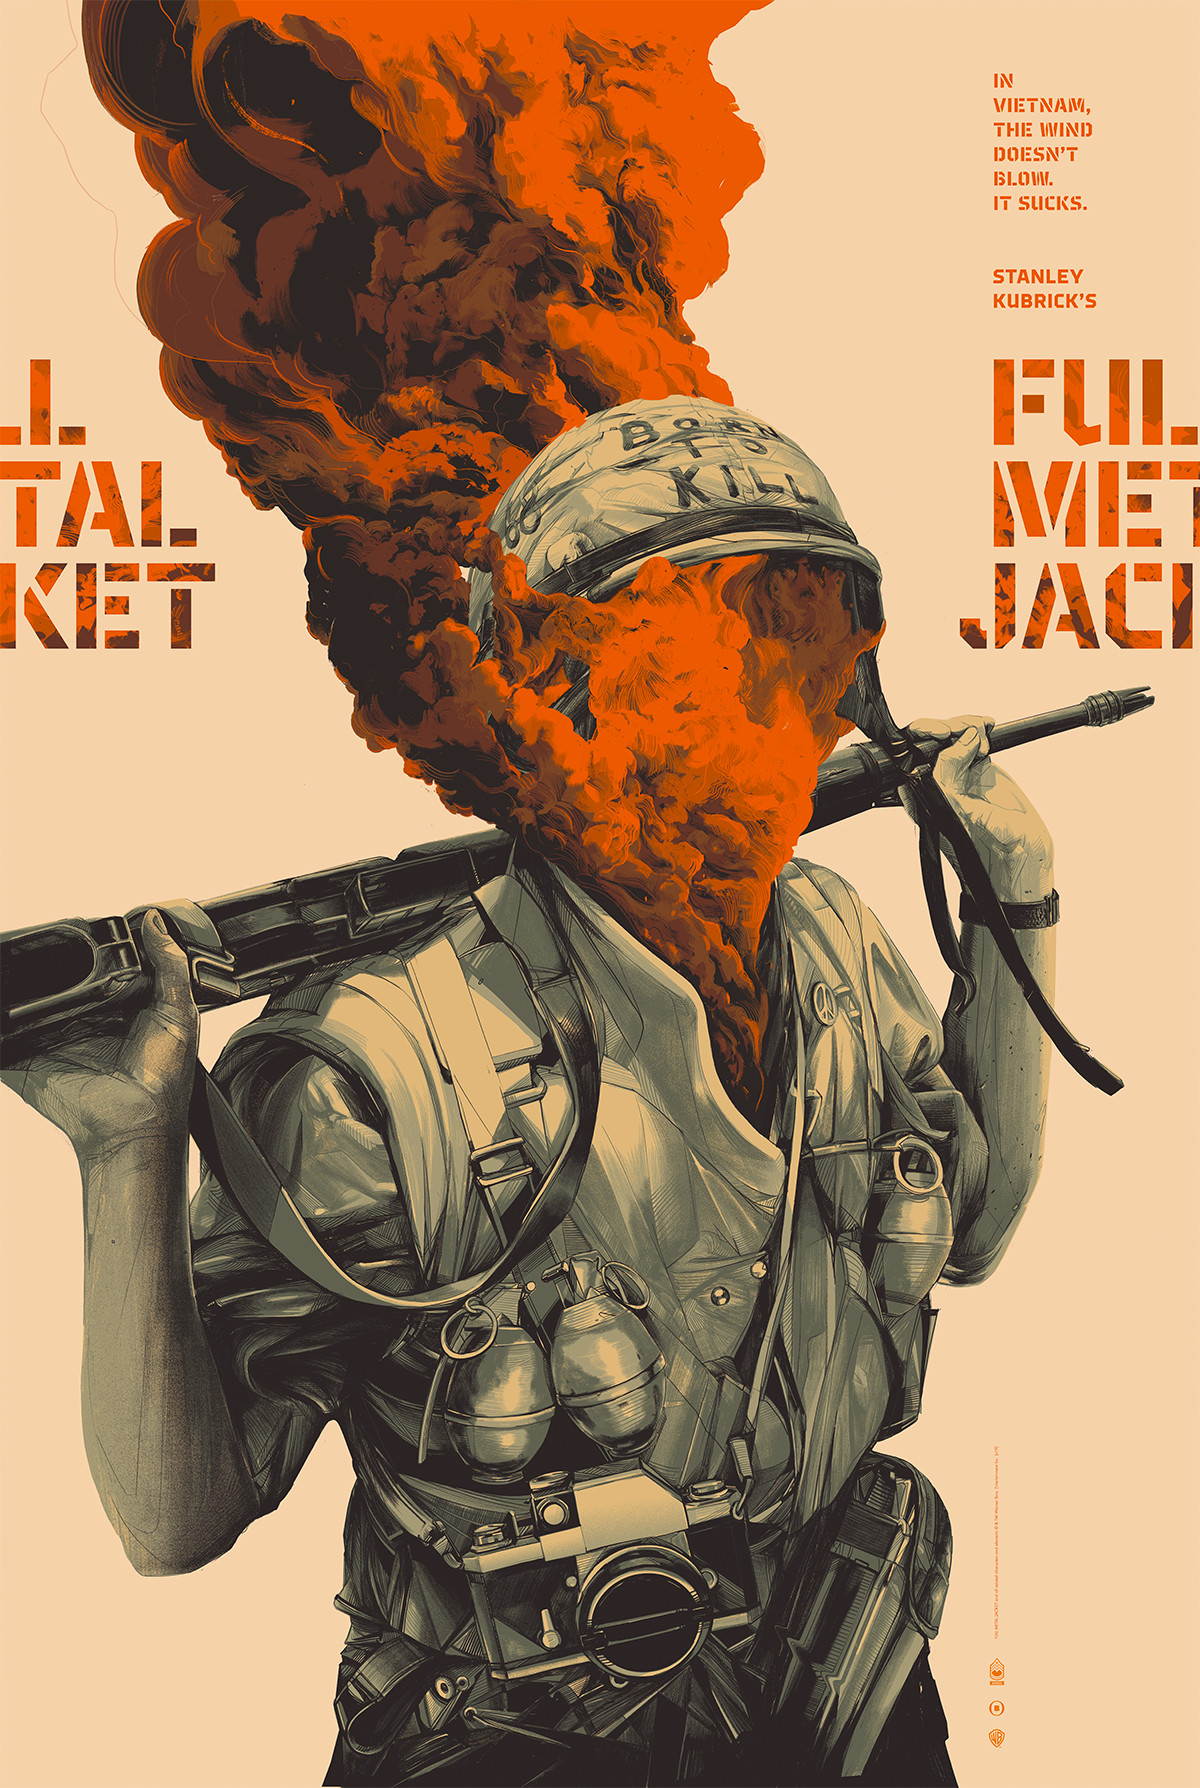 Poster for Full Metal Jacket showing the smoky face of a soldier in a helmet born to kill.